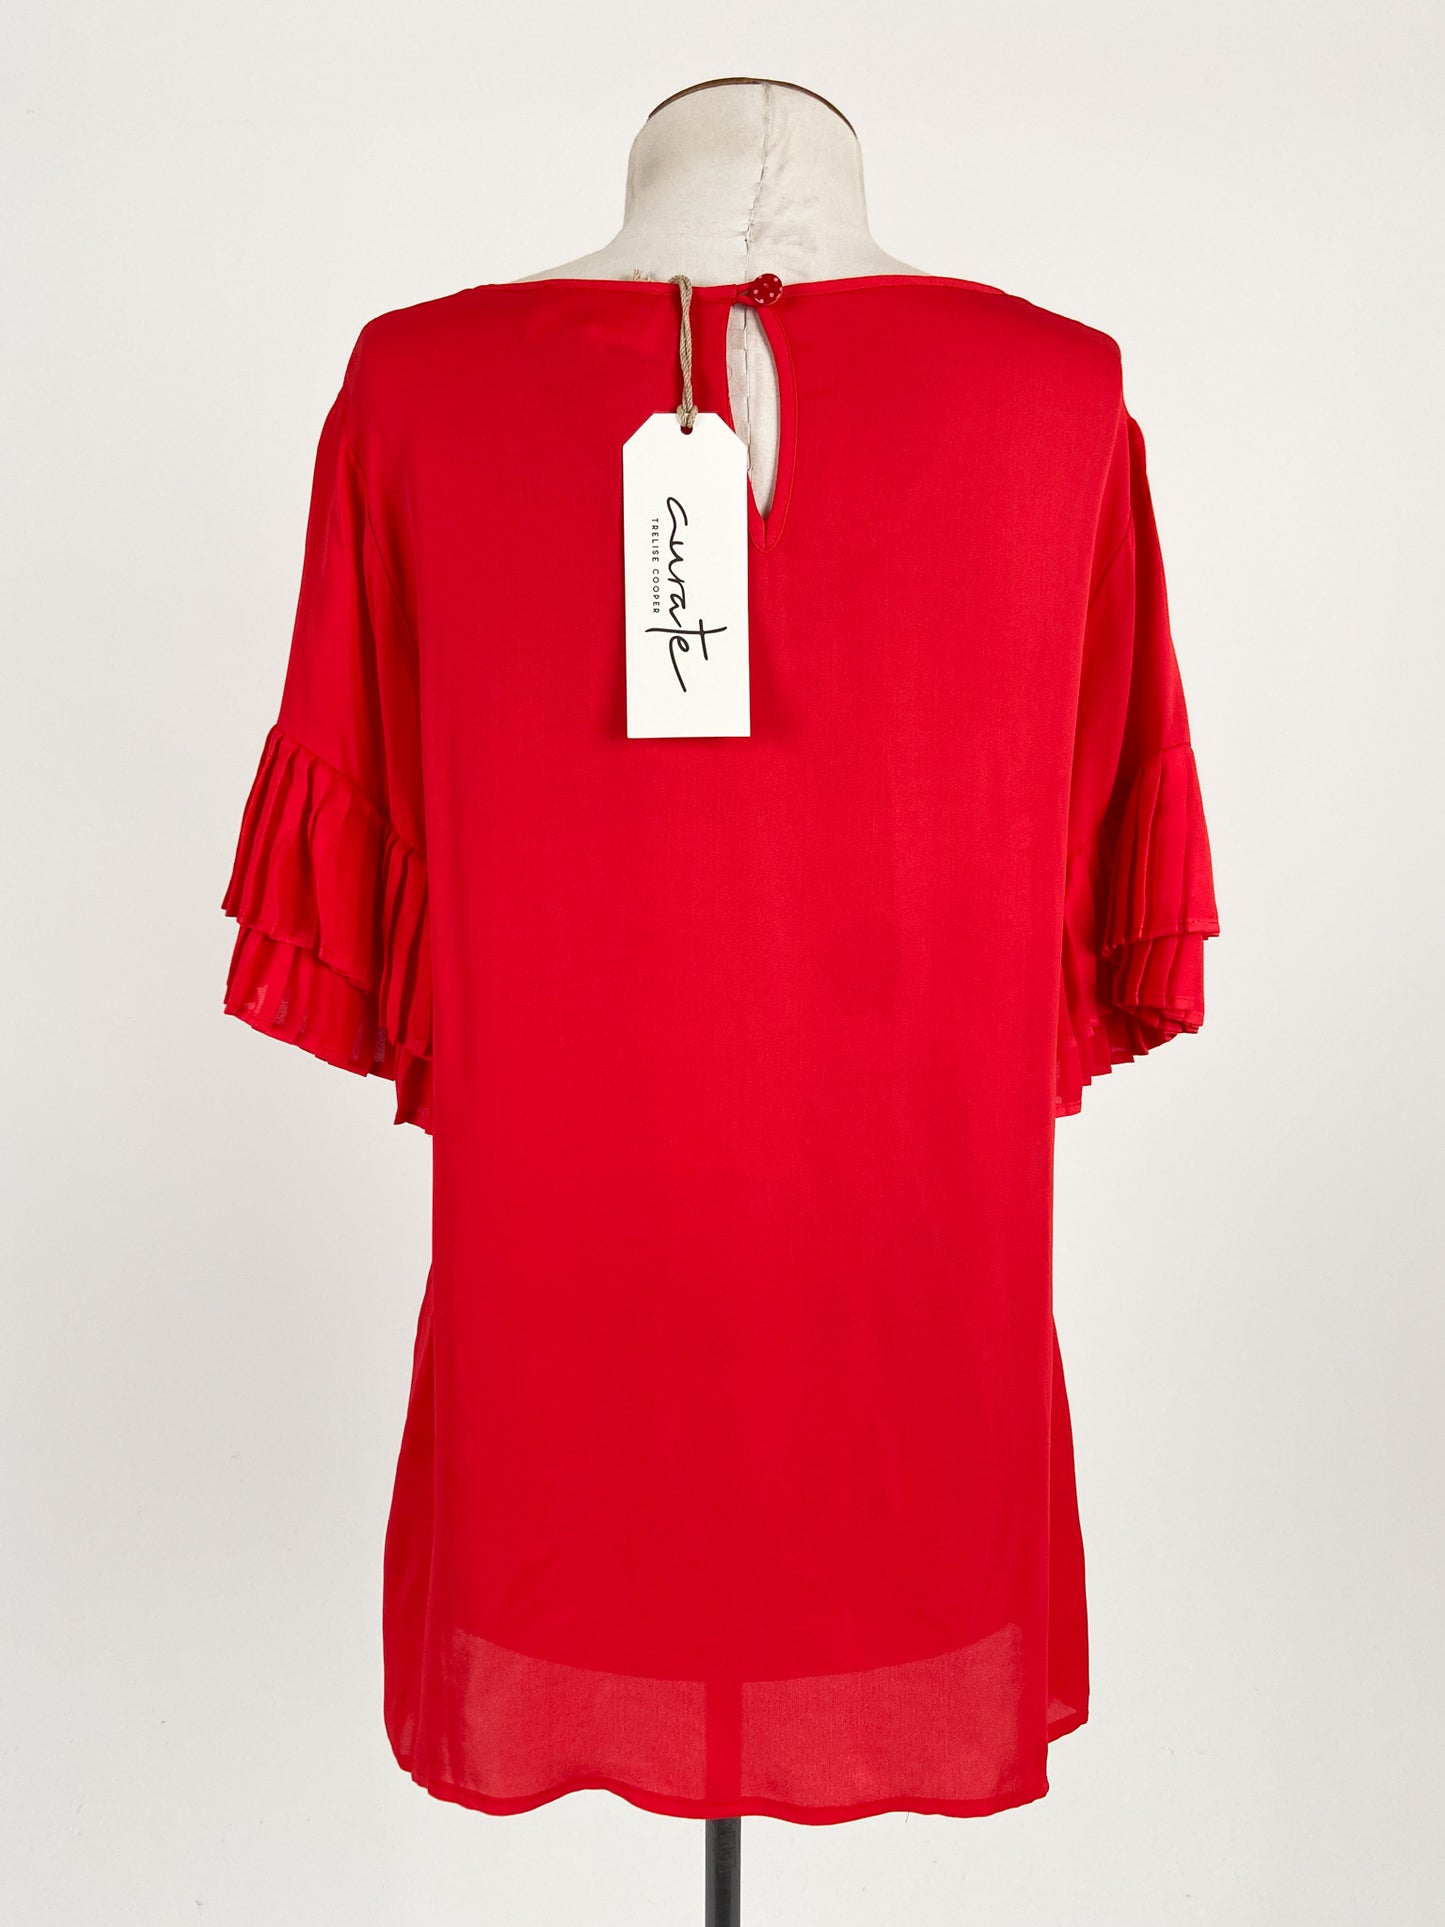 Trelise Cooper | Red Workwear Top | Size XS